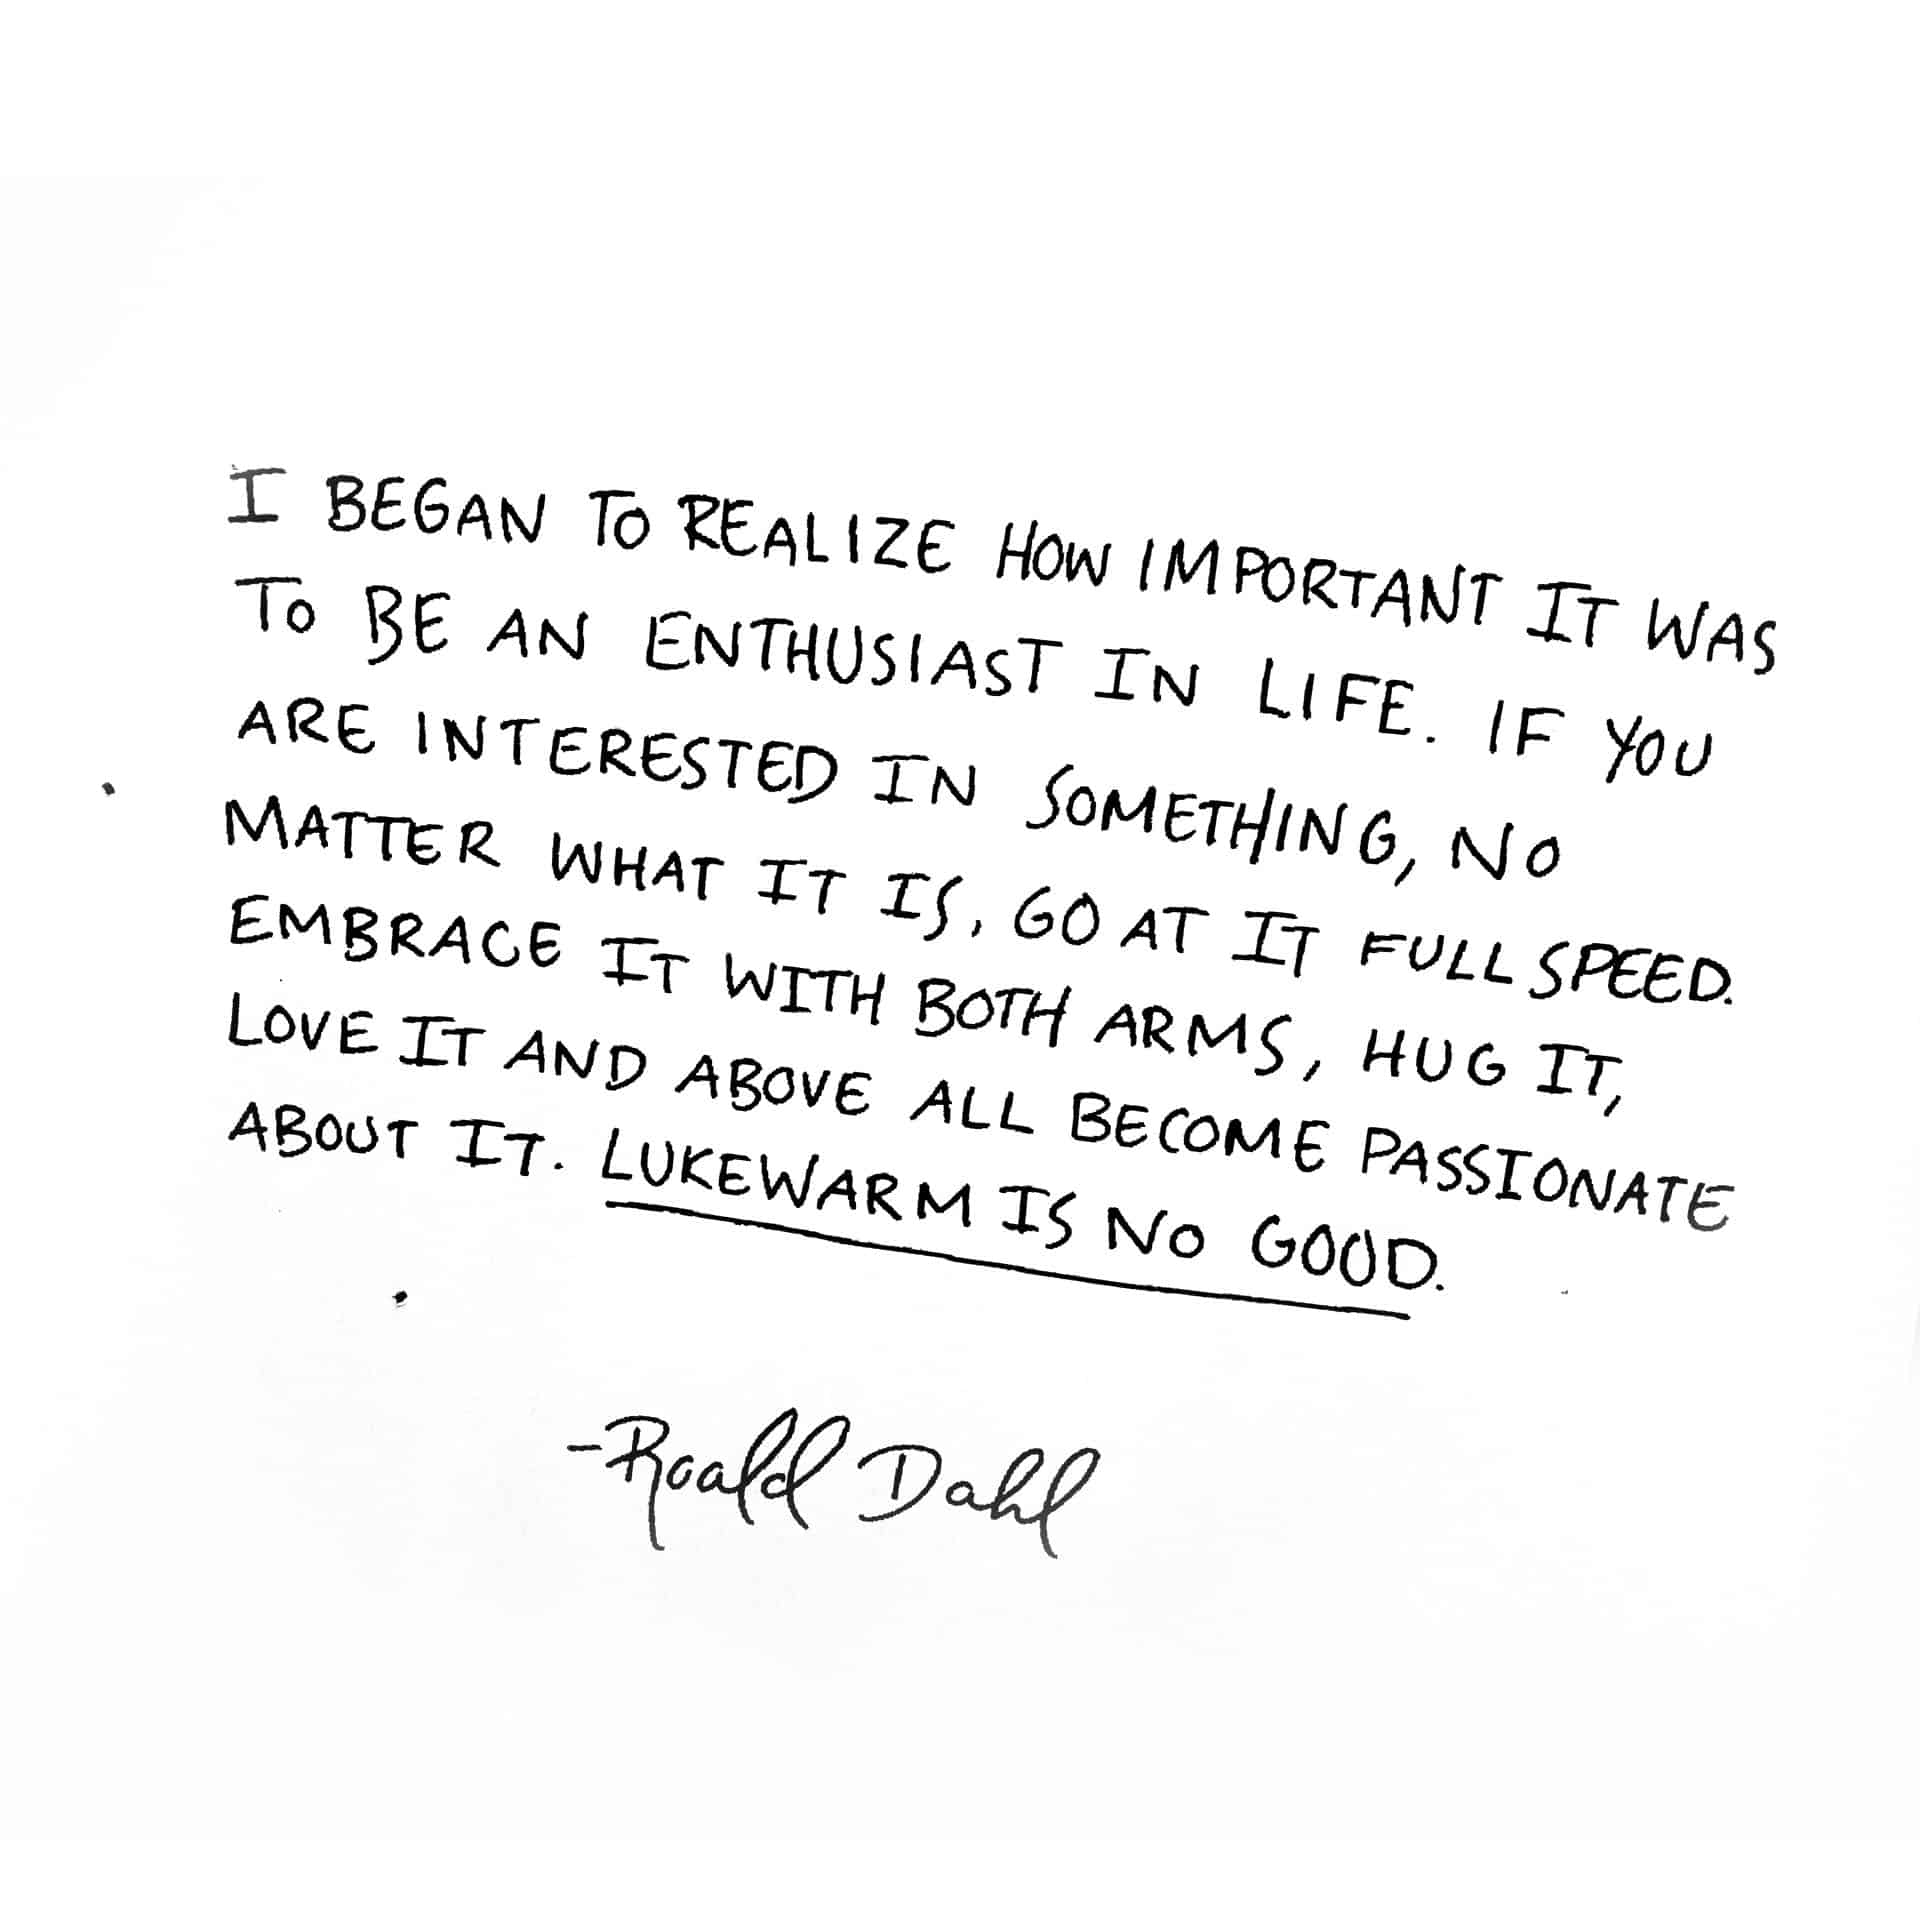 Be an Enthusiast in Life